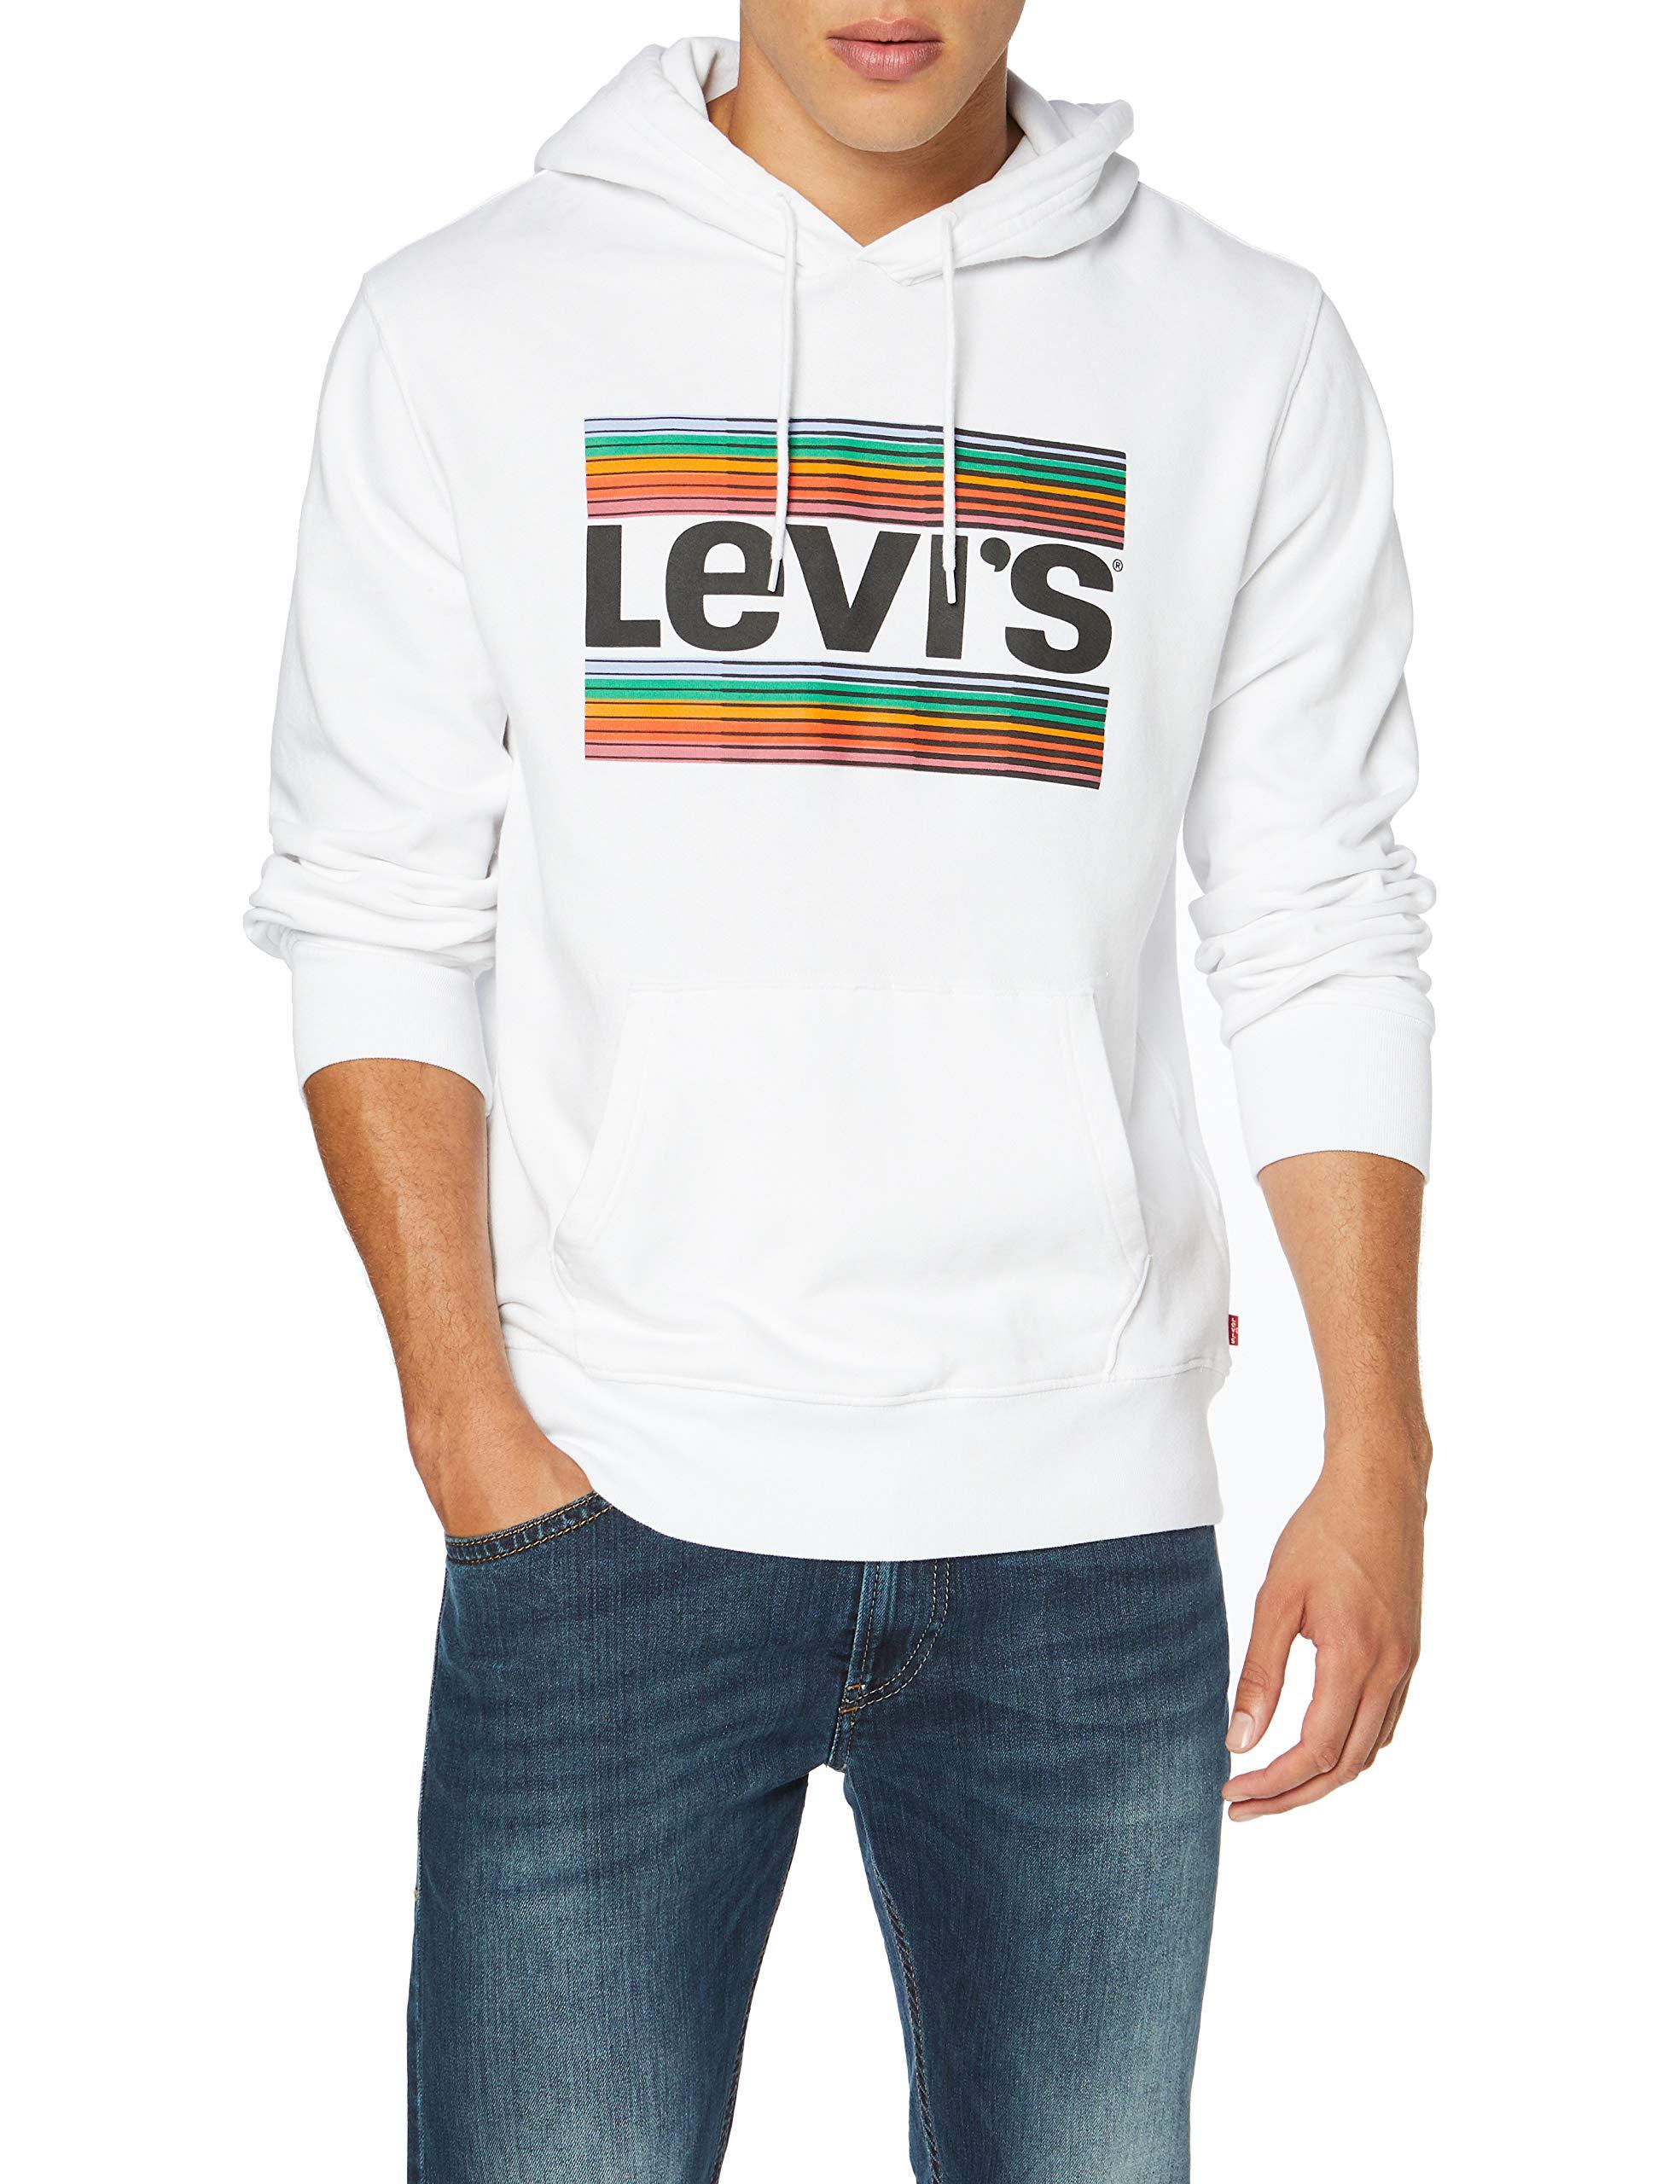 Levi's Cotton Graphic Po Hoodie-b in White for Men - Lyst